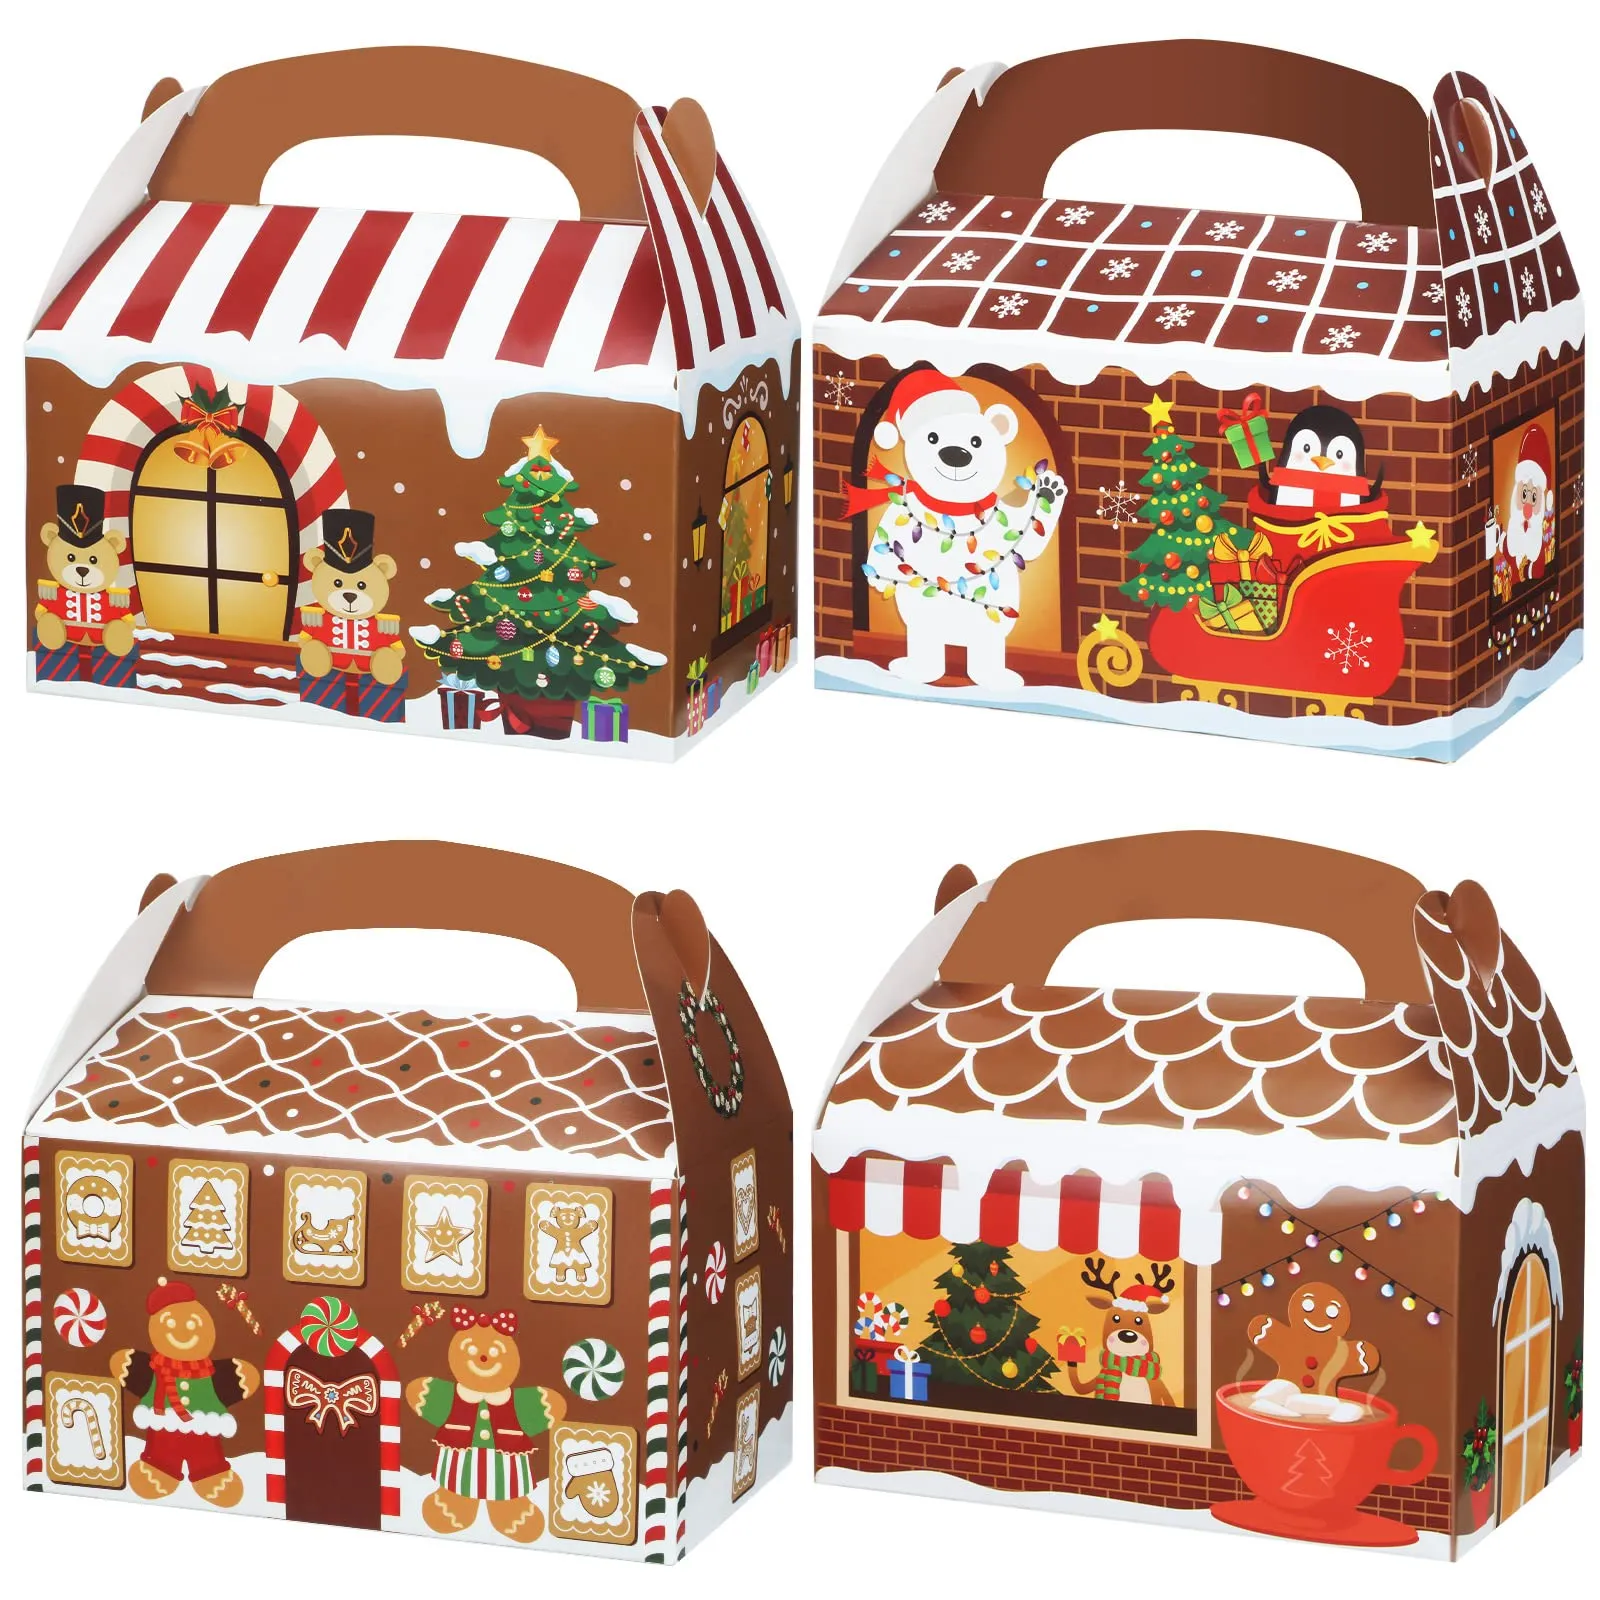 Mini Christmas Box Candy For Christmas Party Favors And Gifts Dr. Ote4B  From Bdesybag, $0.4